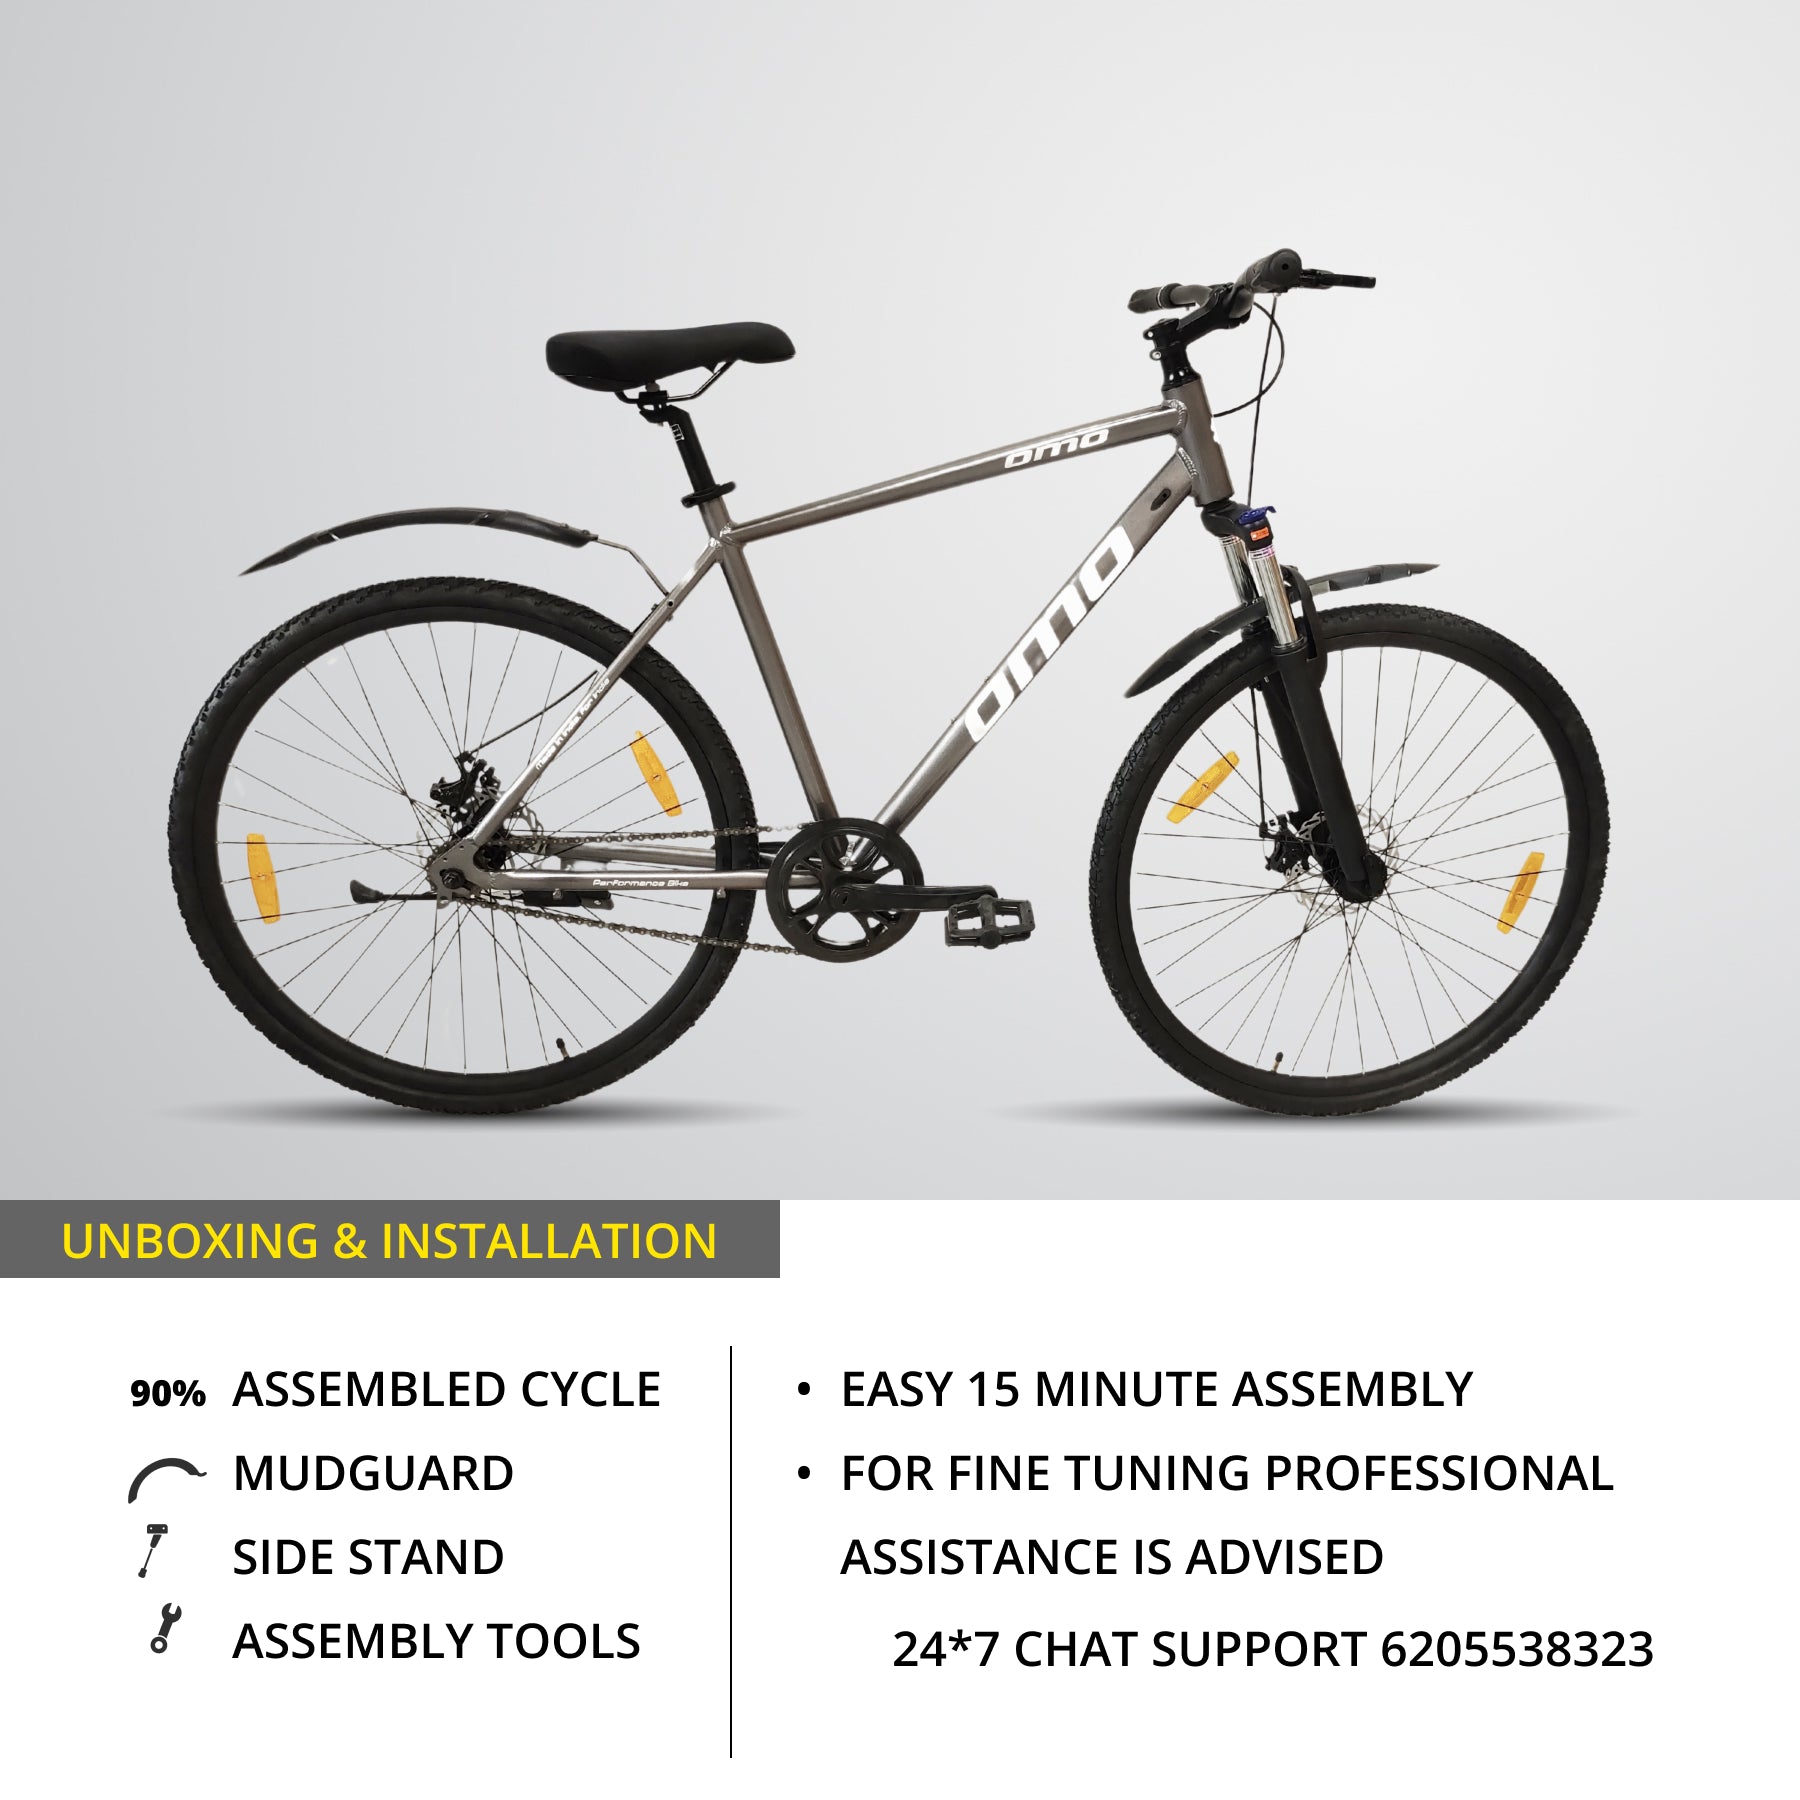 OMO bikes ladakh 1s Alloy frame single speed without gear lockout suspension hybrid bike with disc brake black color unboxing installation